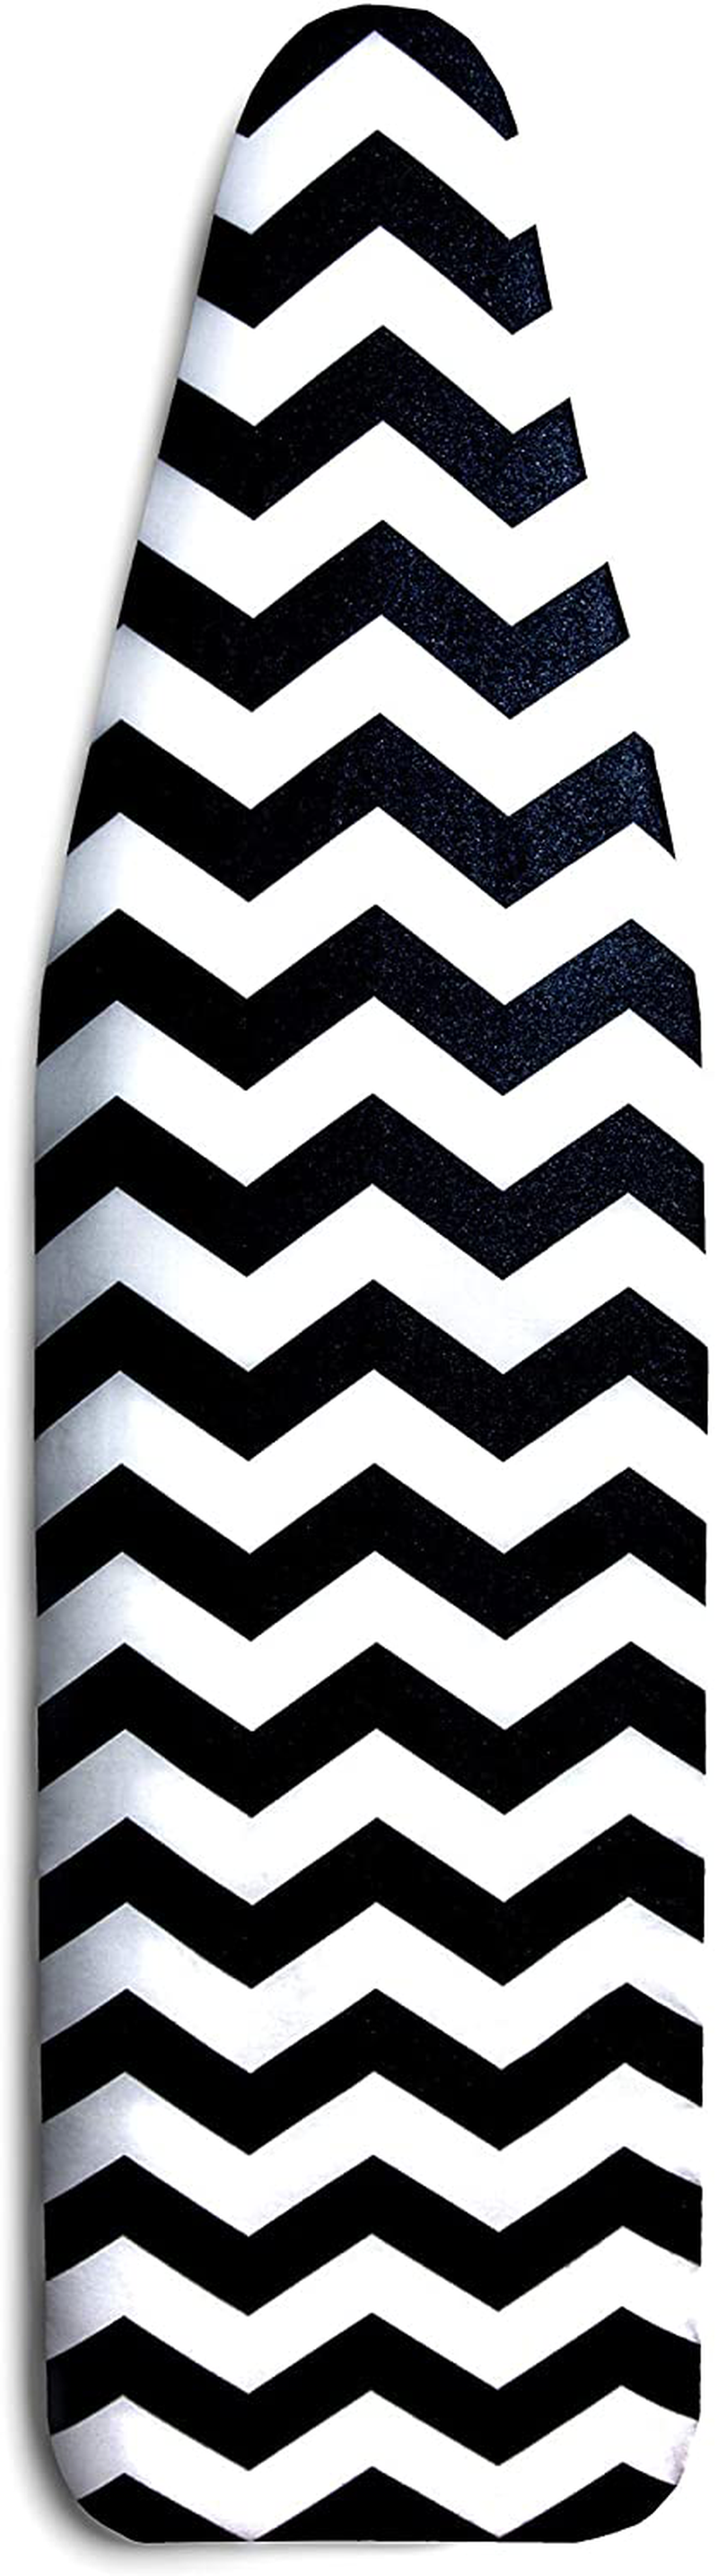 EPICA Silicone Coated Ironing Board Cover- Resists Scorching and Staining - 15" x54 (Chevron: Black and White)